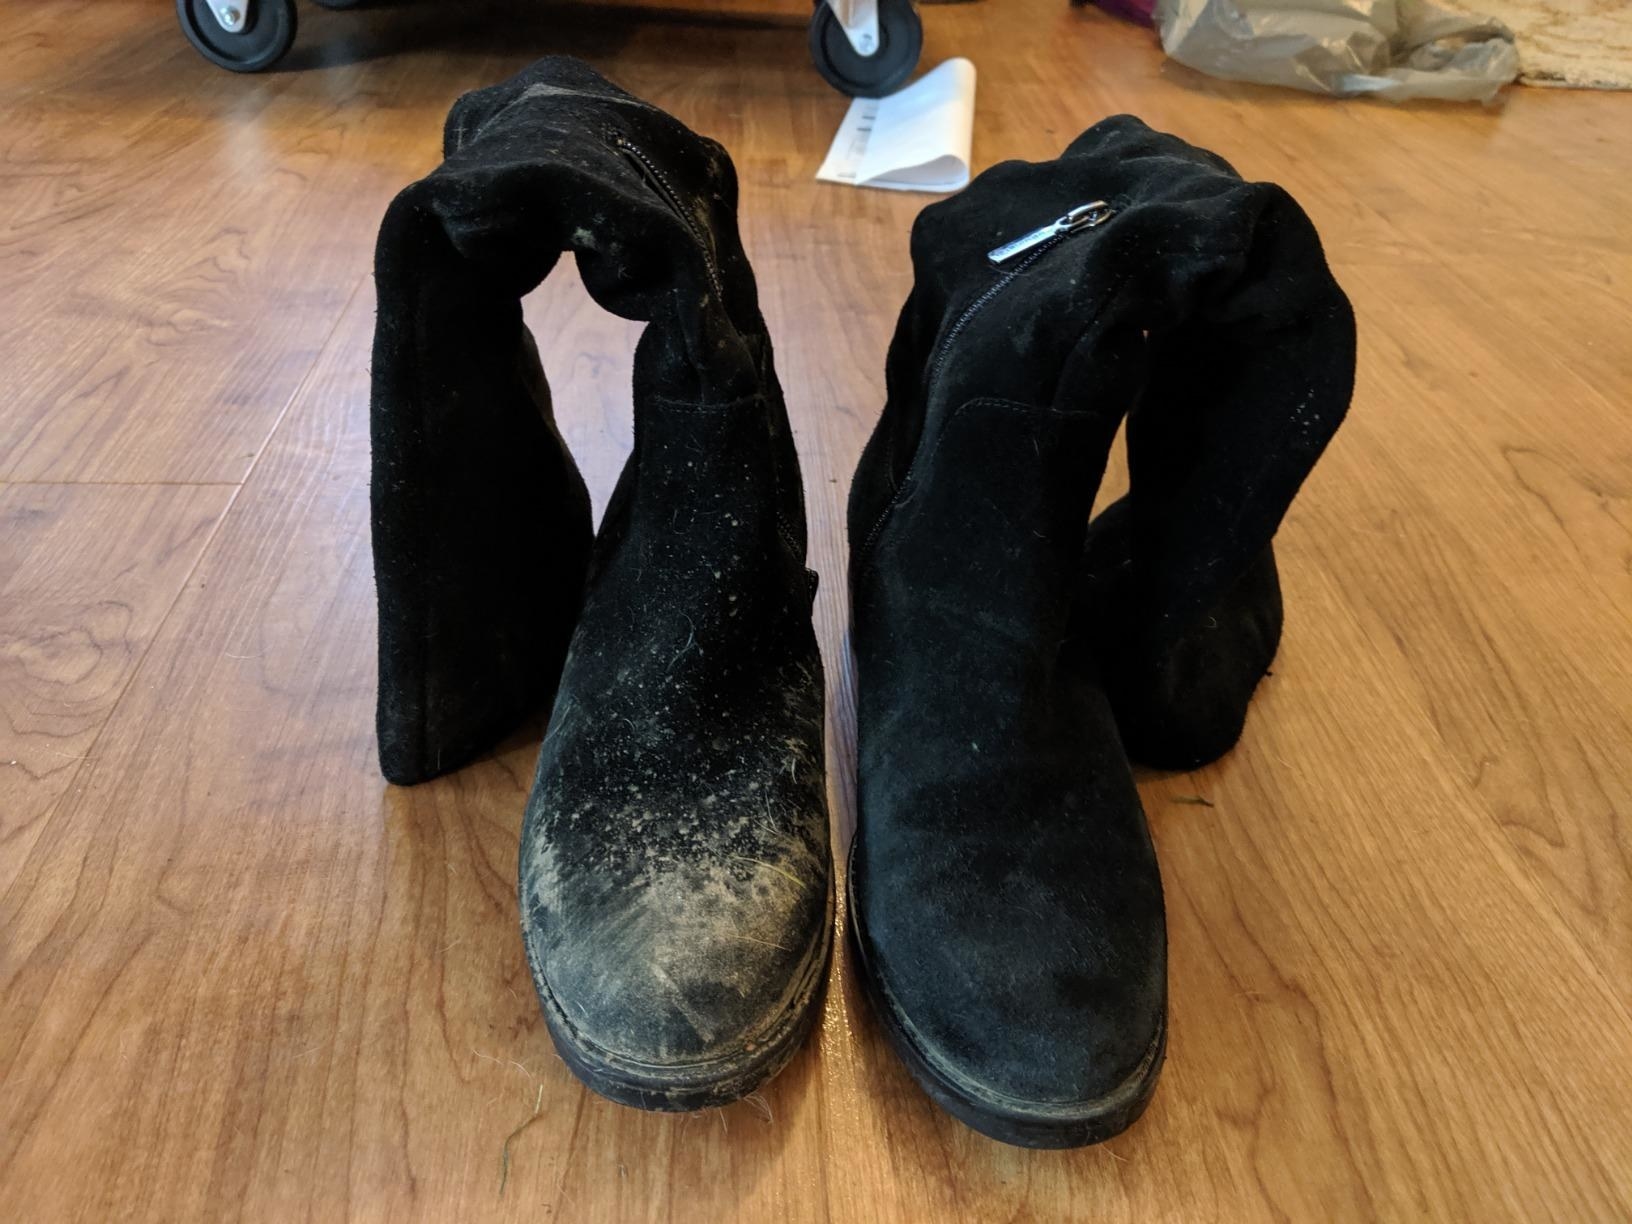 A reviewer&#x27;s black suede boots: the left covered in light brown dirt, the right completely clean and new-looking